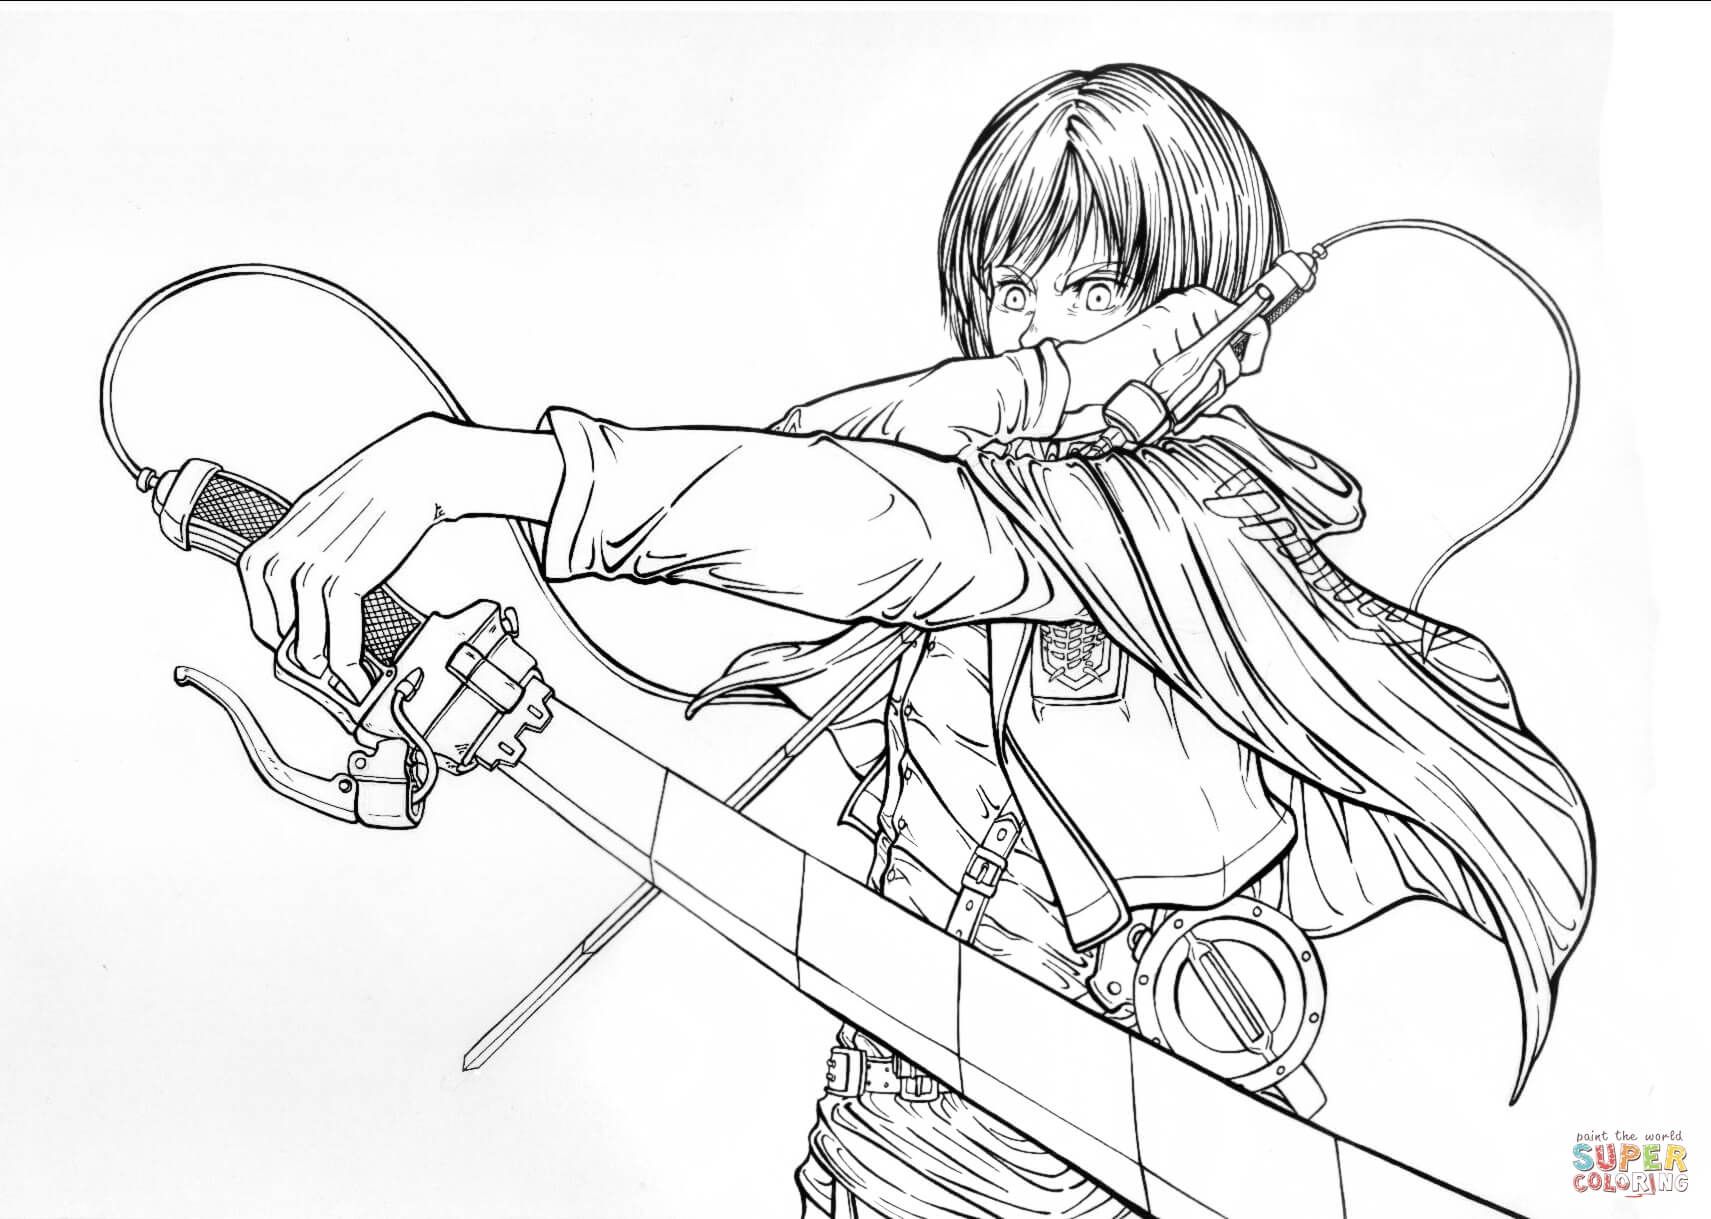 Coloring Pages : Awesome Attack On Titan Coloring Pages Pin ...